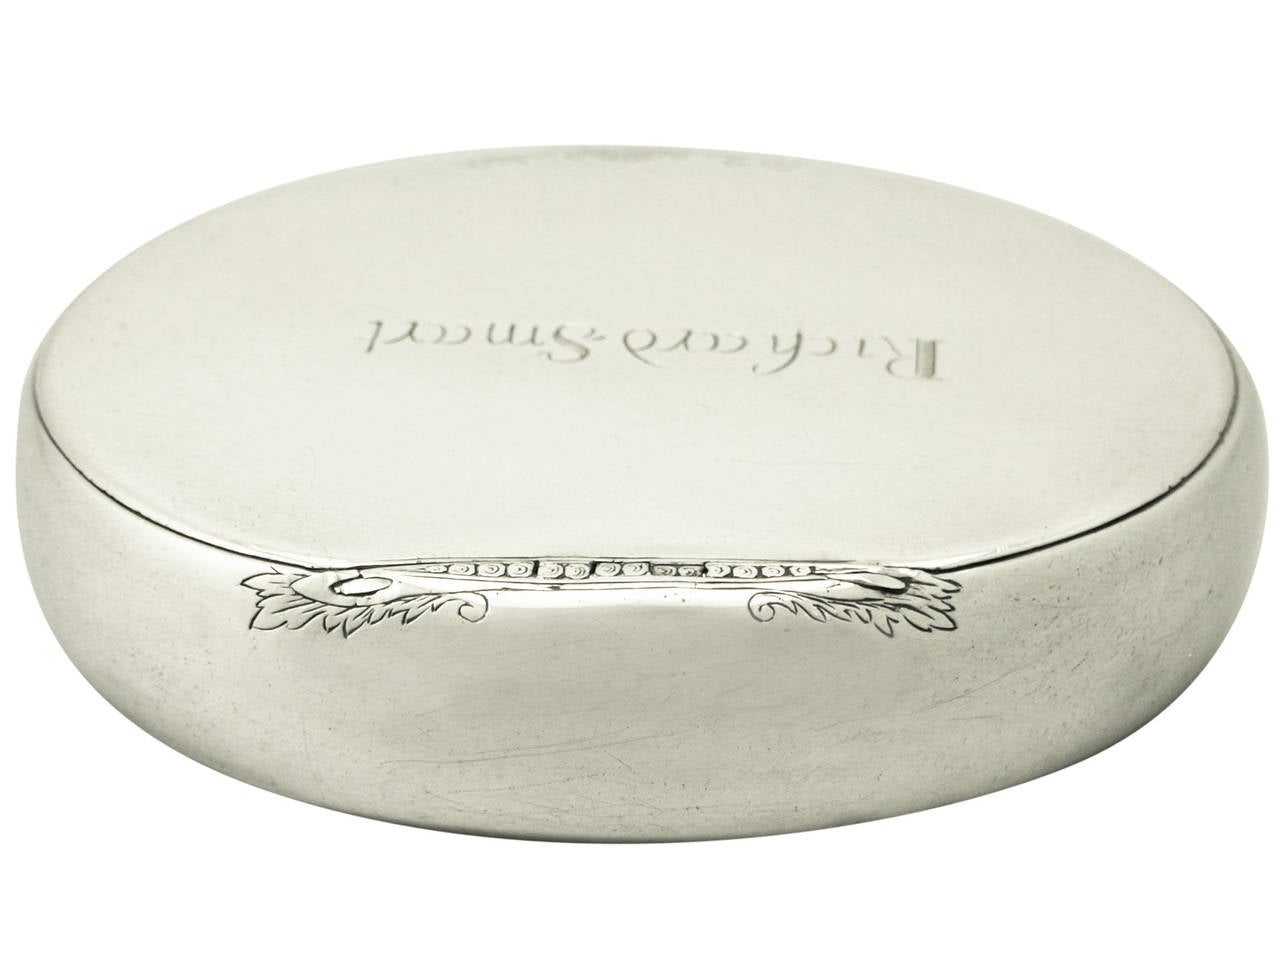 An exceptional antique early Georgian English sterling silver tobacco box; an addition to our smoking related silverware collection

This dine antique George I sterling silver tobacco box has a plain oval rounded form.

The surface of the box is